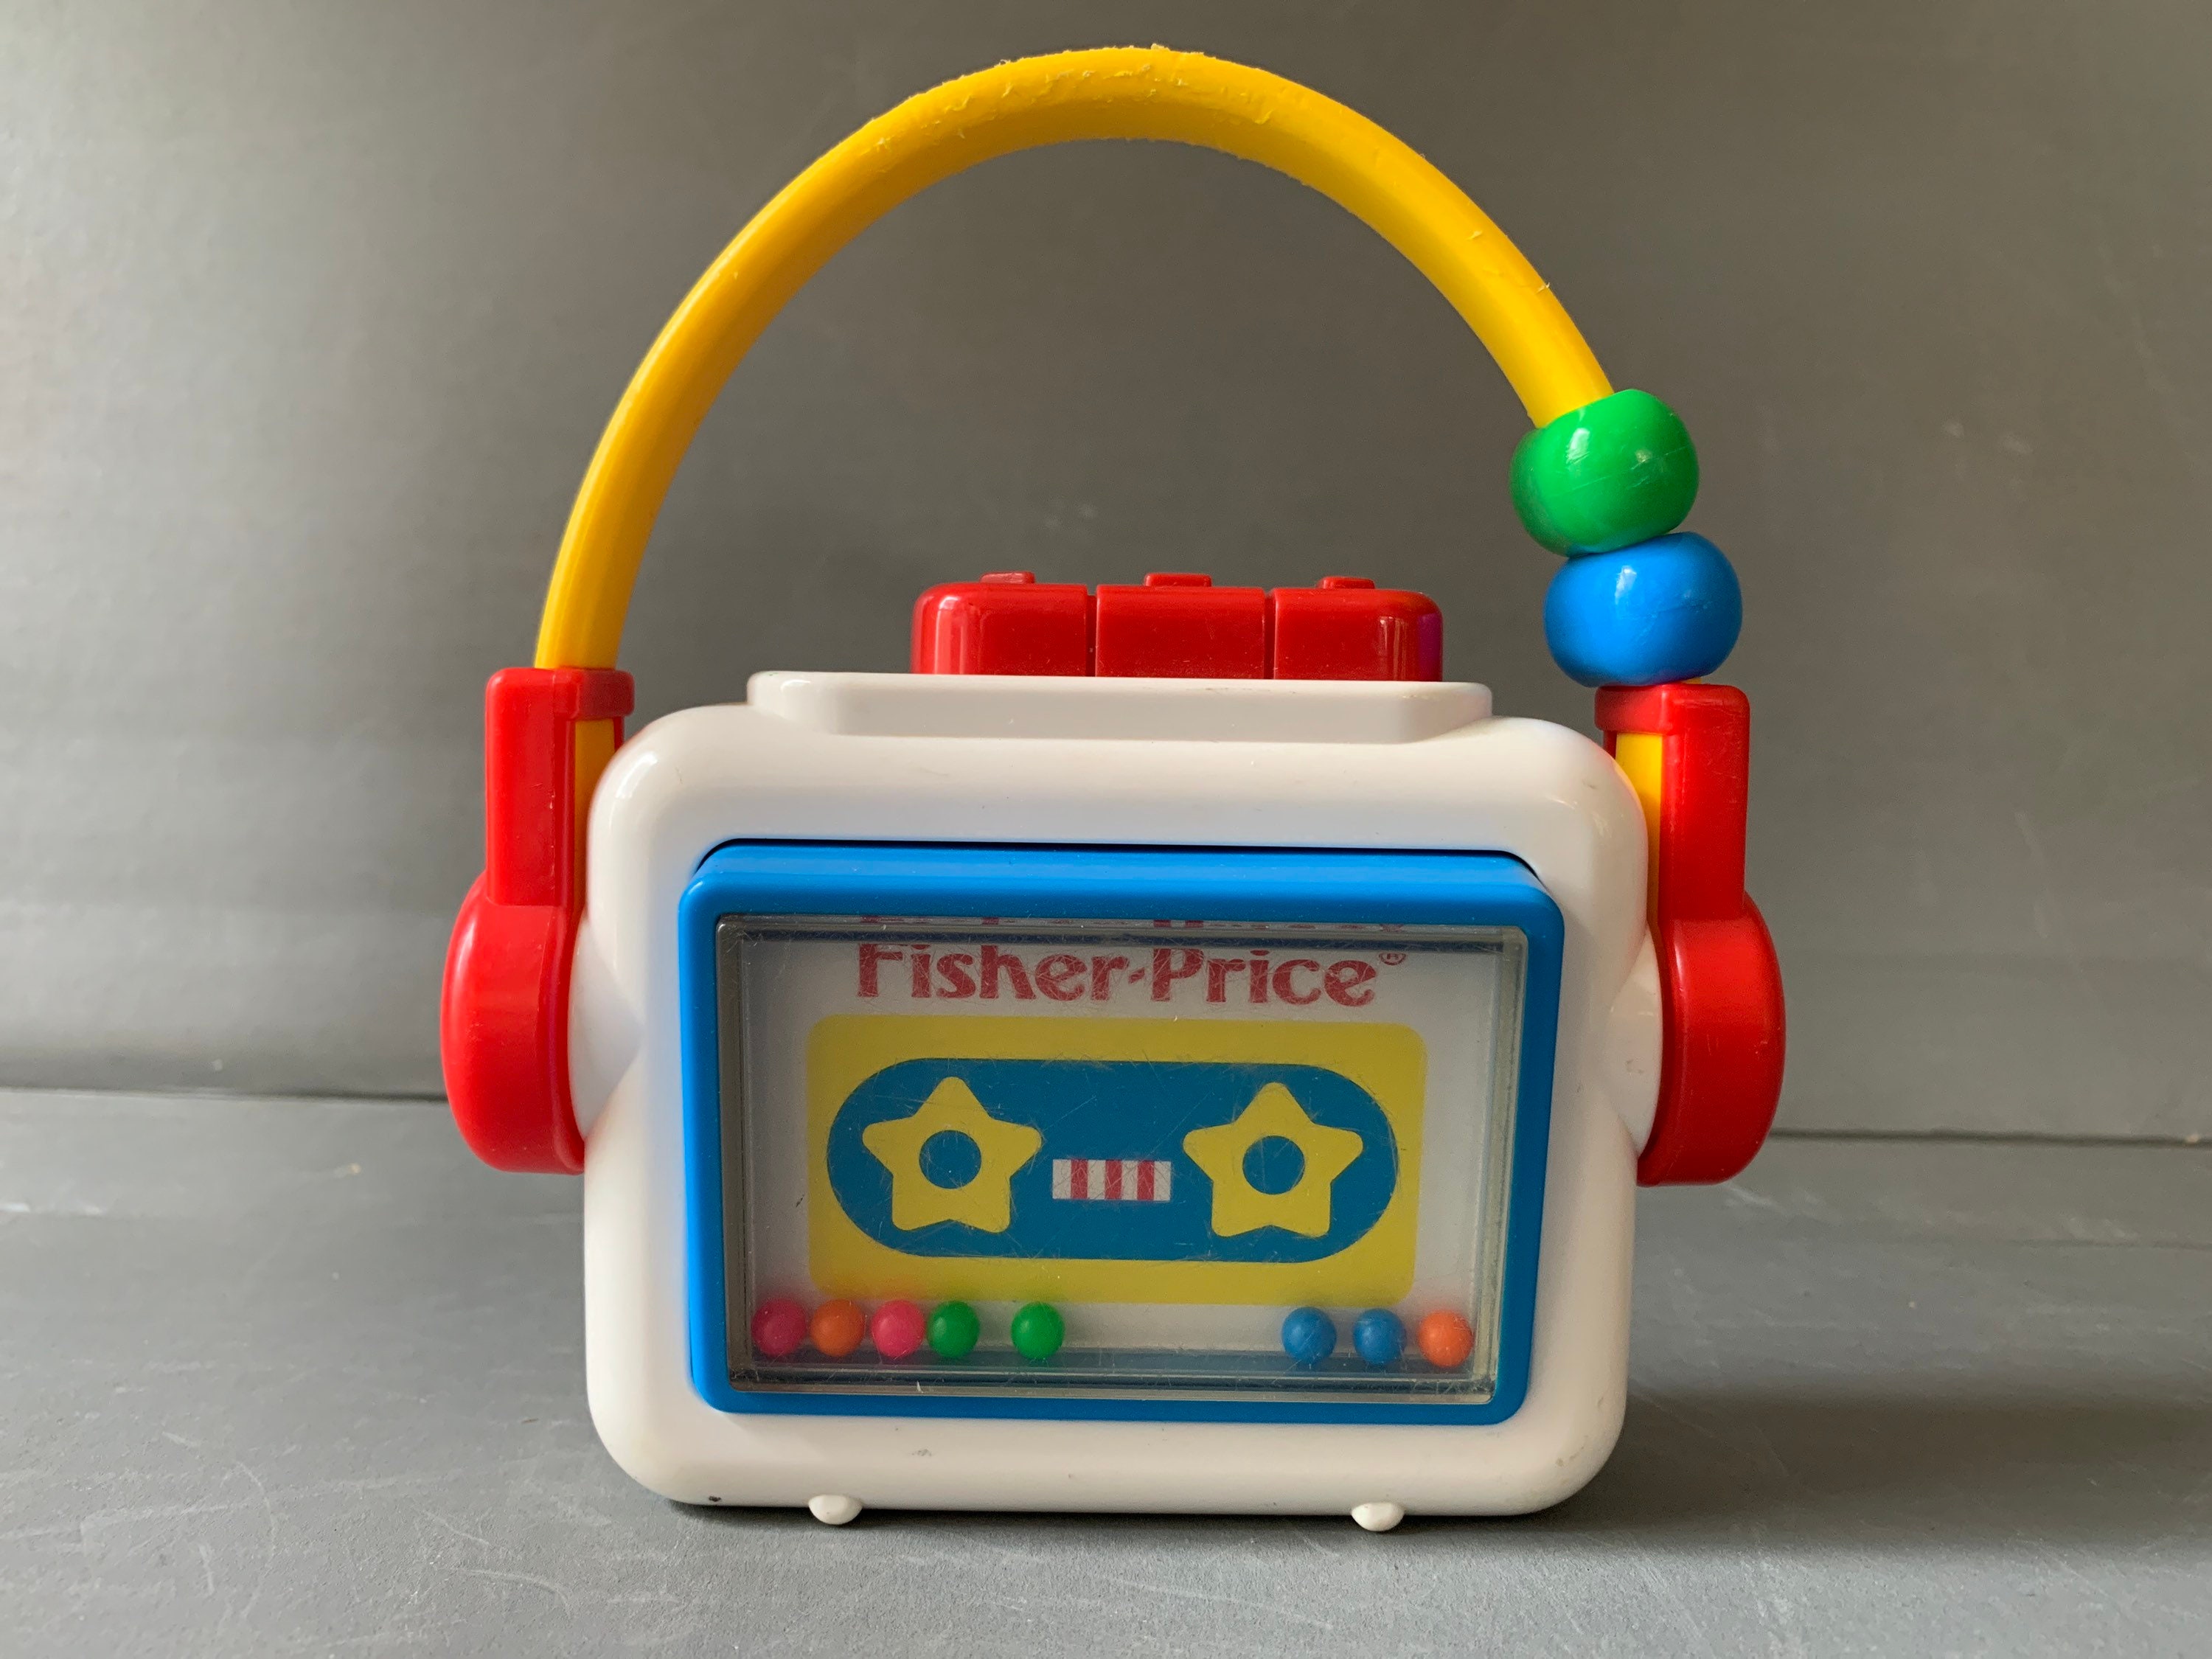 Vintage Fisher Price Toy Cassette Player 1992 - Etsy